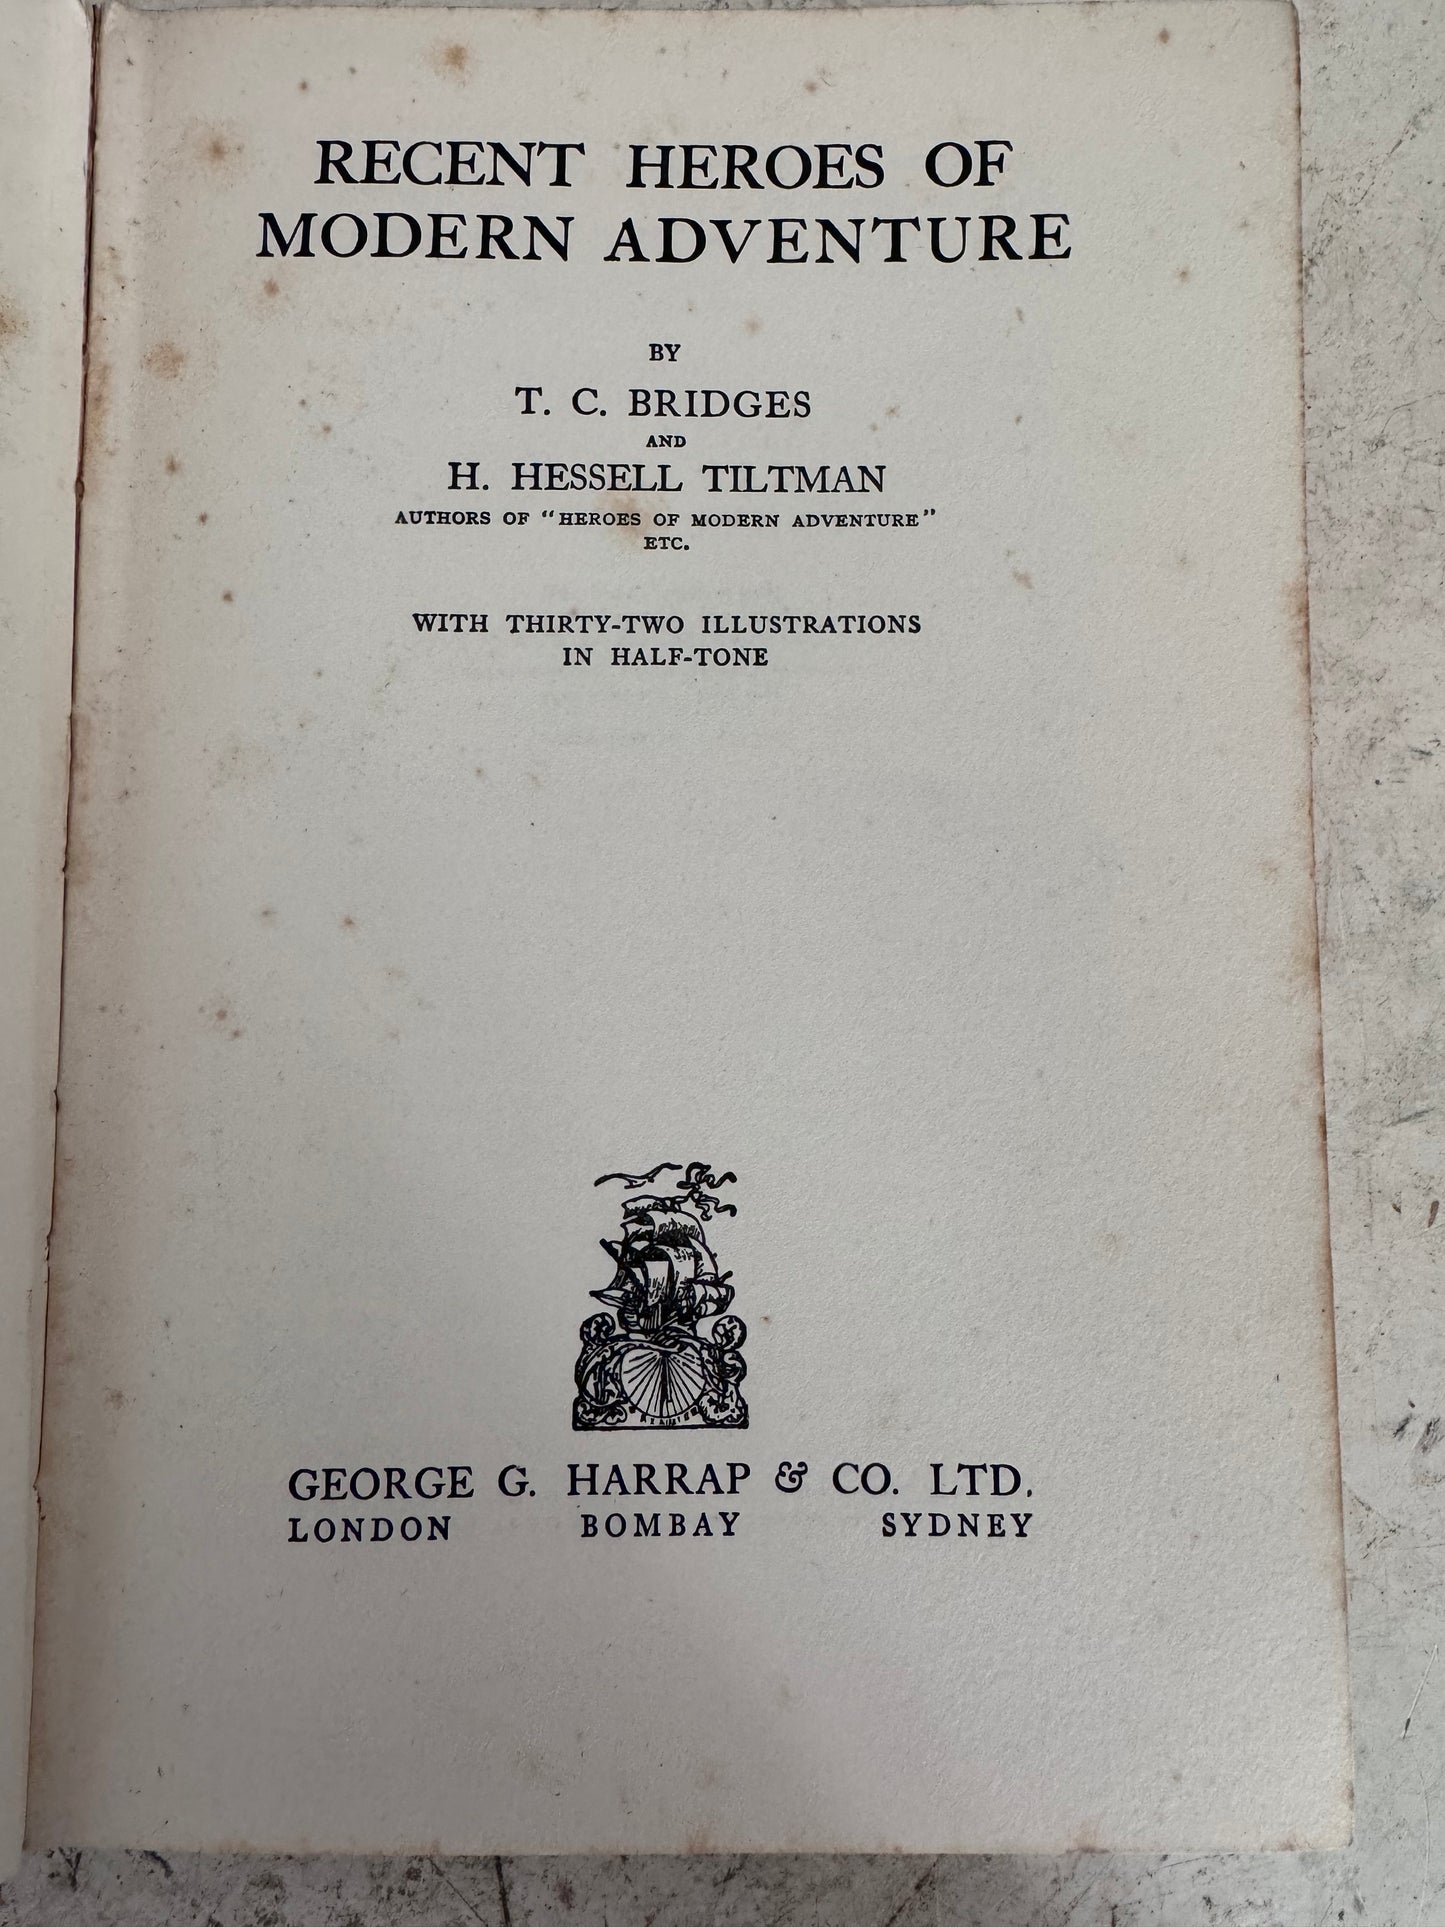 Recent Heroes Of Modern Adventure by T.C. Bridges and H. Hessell Tillman 1937